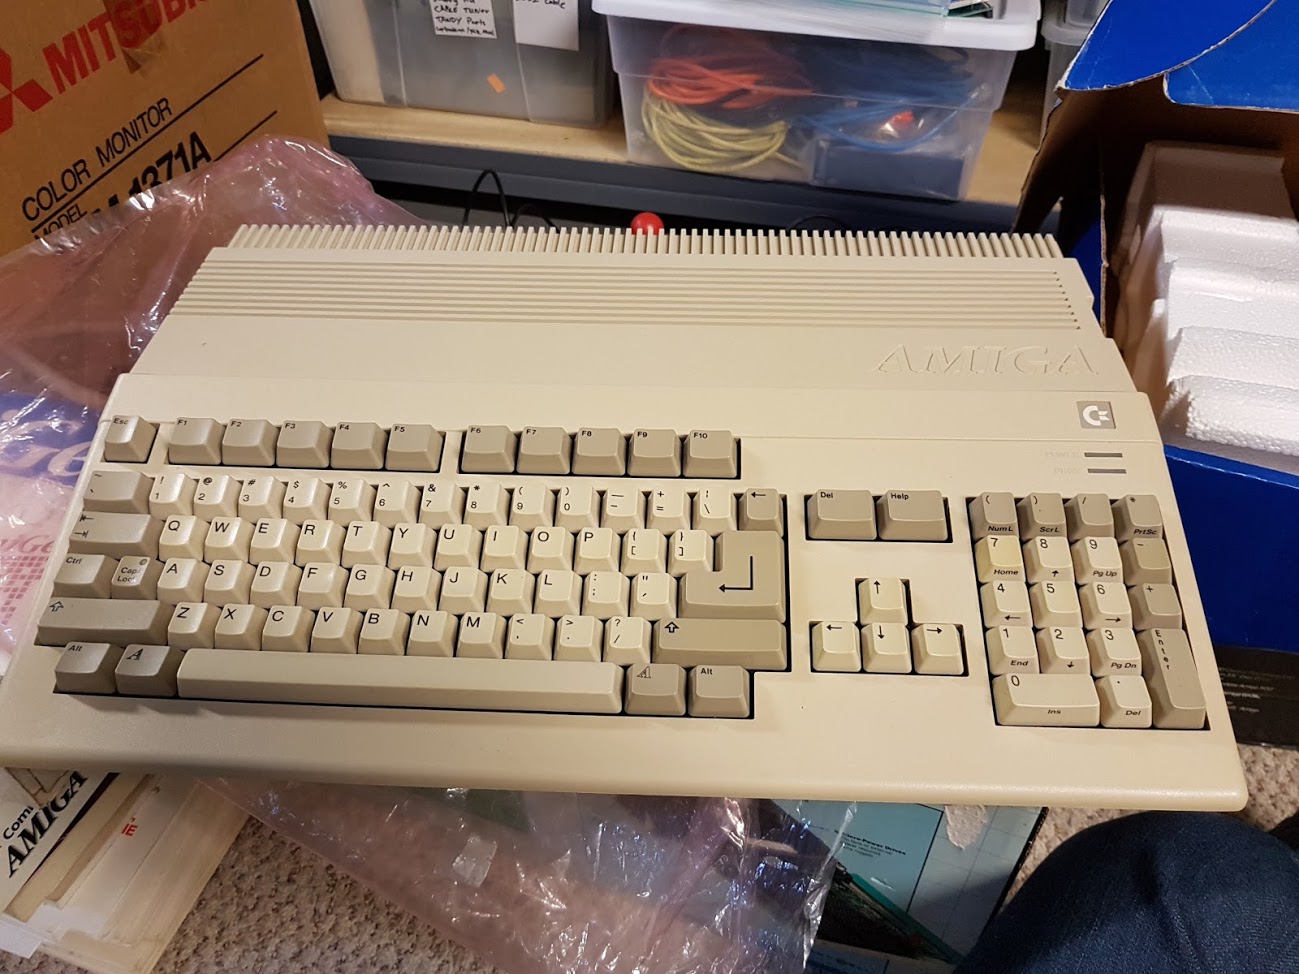 Second Amiga, also in great shape. Needs a minor clean only.